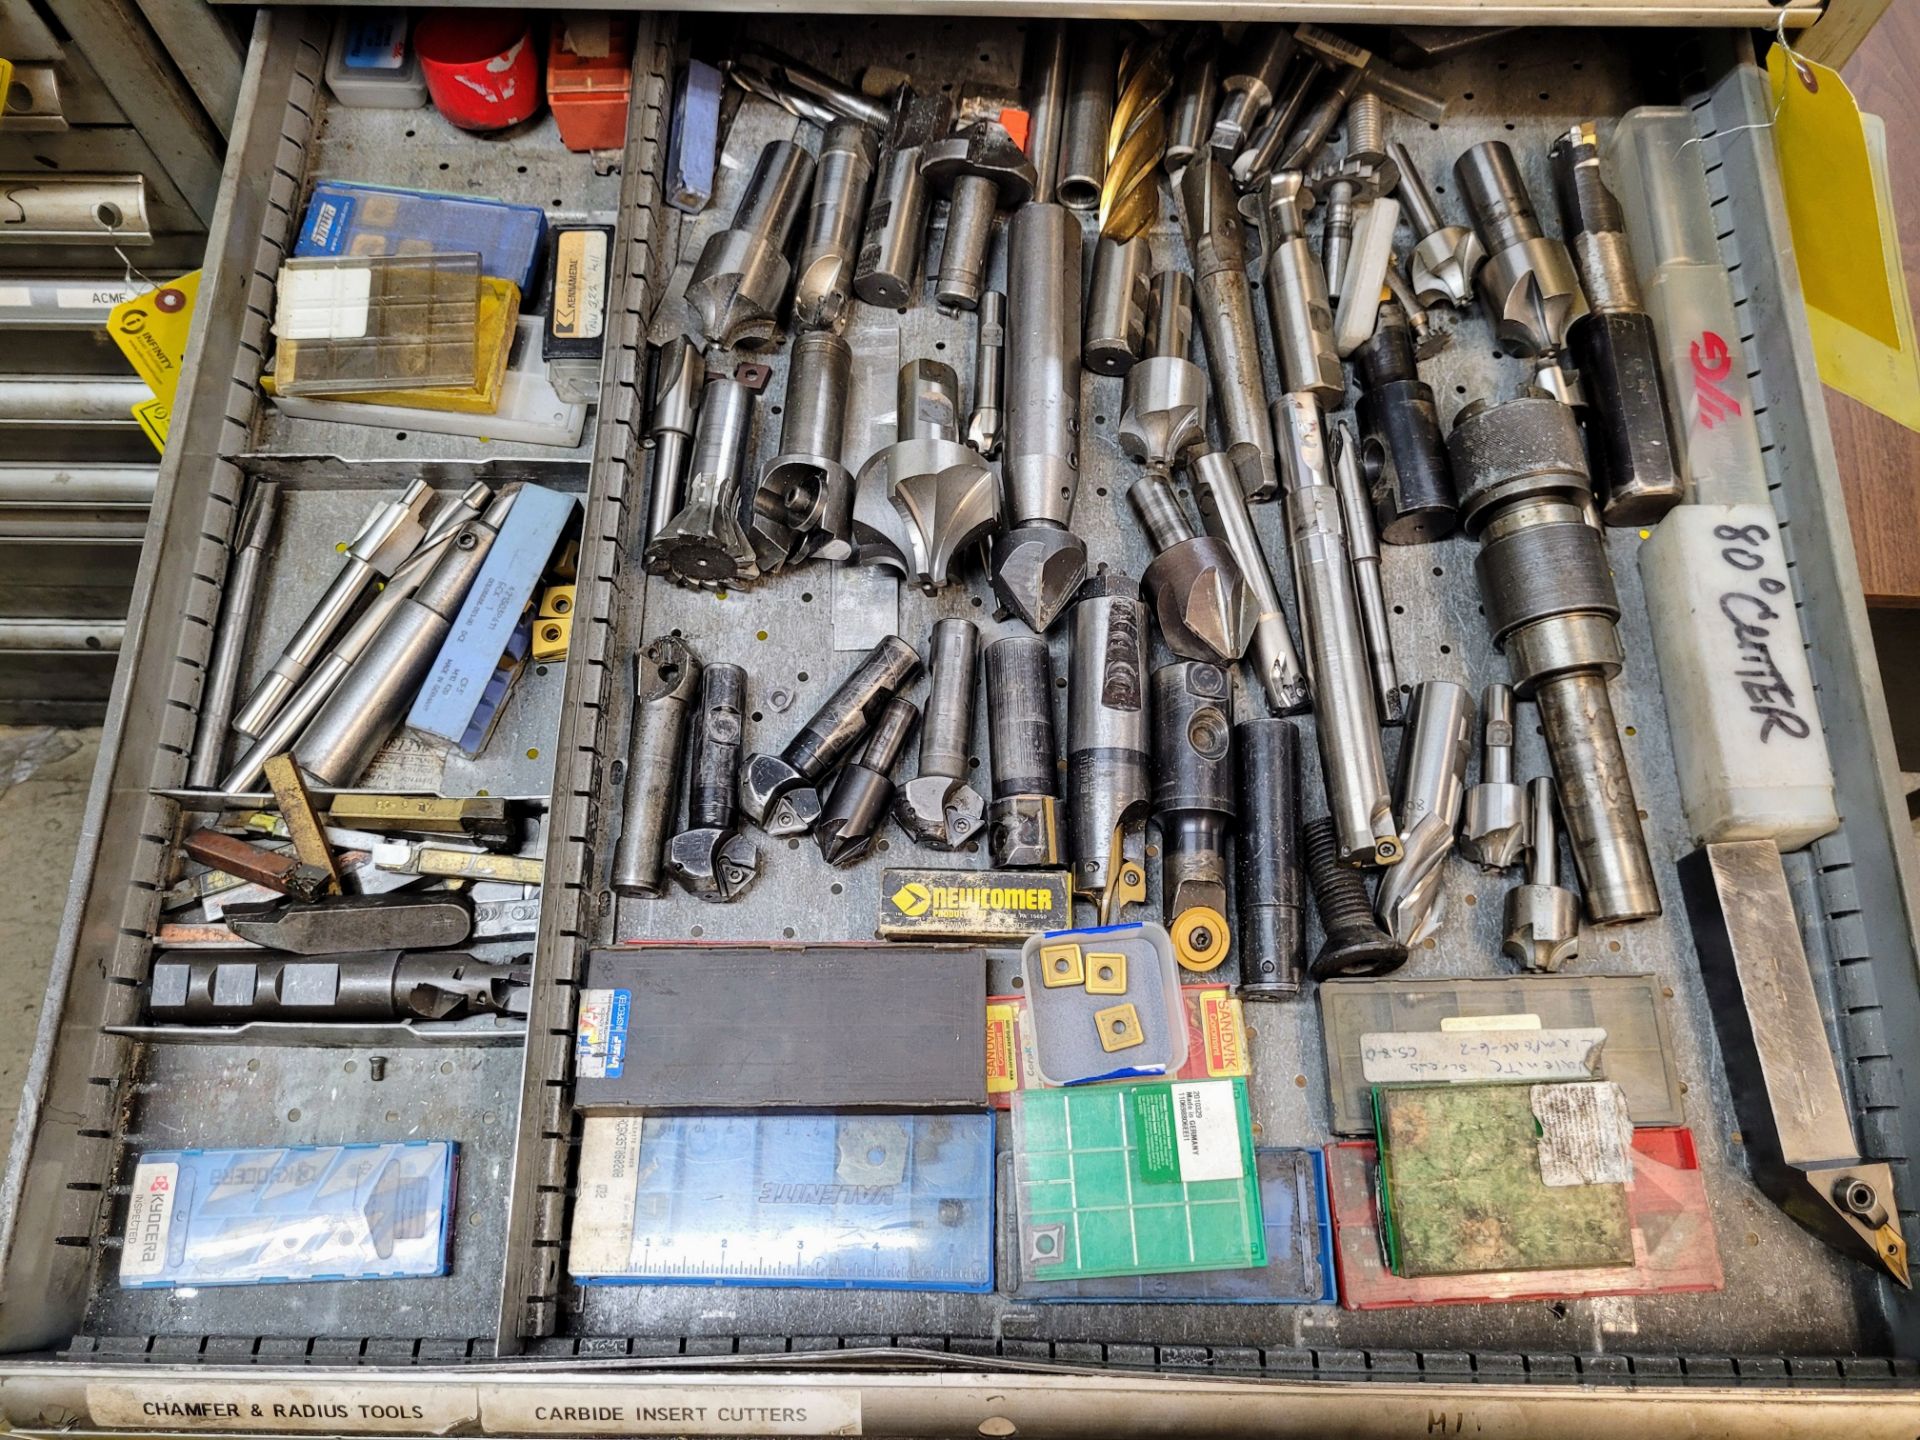 CONTENTS OF (1) TOOL CABINET DRAWER INCLUDING CARBIDE INSERTS, CARBIDE INSERT CUTTER BARS, END